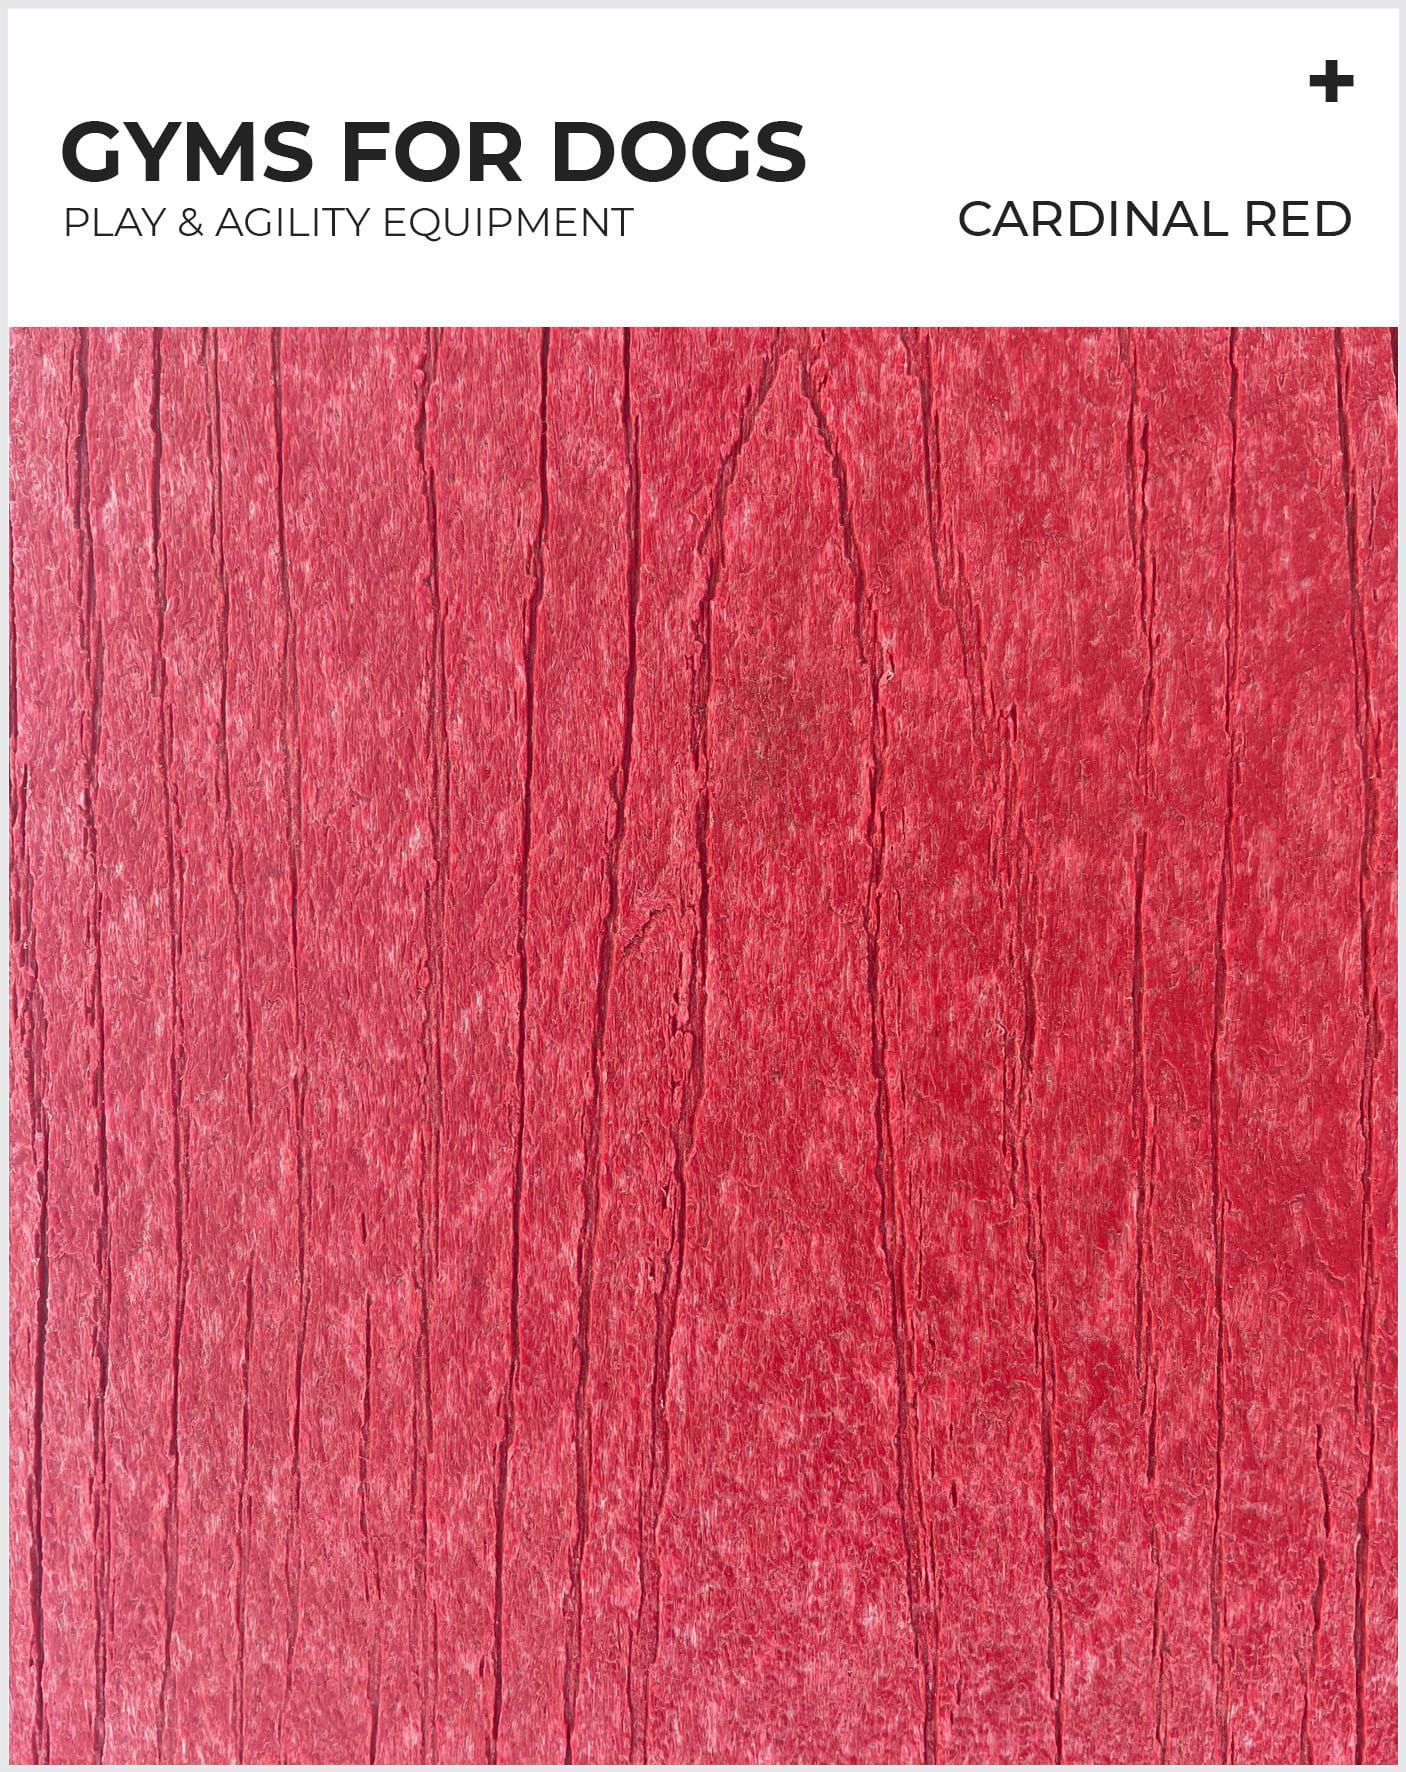 Dog Park Equipment Agility Products - Cardinal Red